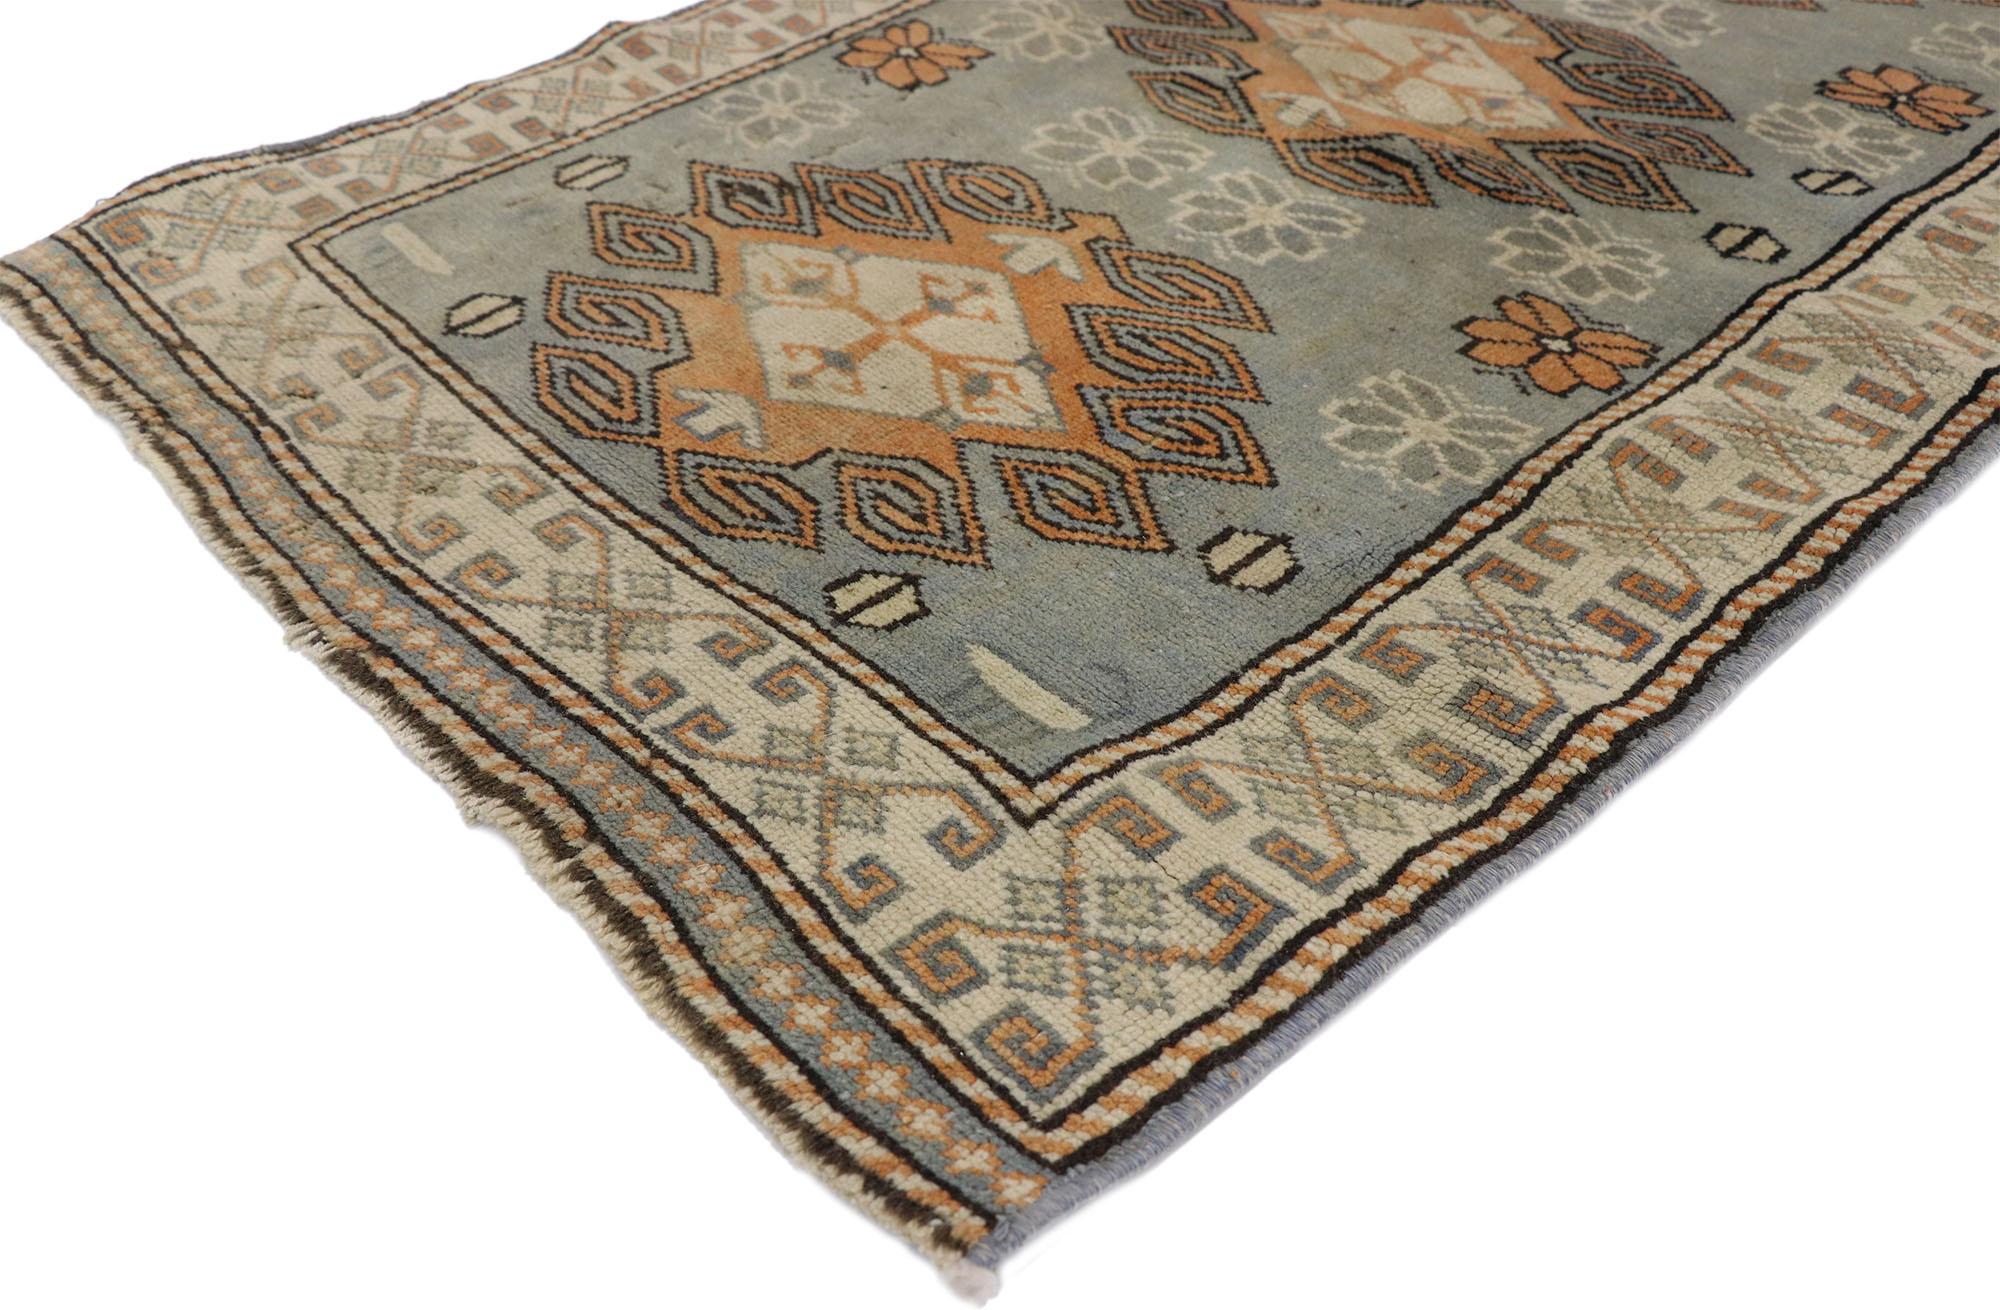 52586, vintage Turkish Oushak rug with Artisan Belgian style and soft colors. This hand knotted wool vintage Turkish Oushak rug features three oversized hooked diamond-shaped medallions spread across an abrashed gray field. The medallions are